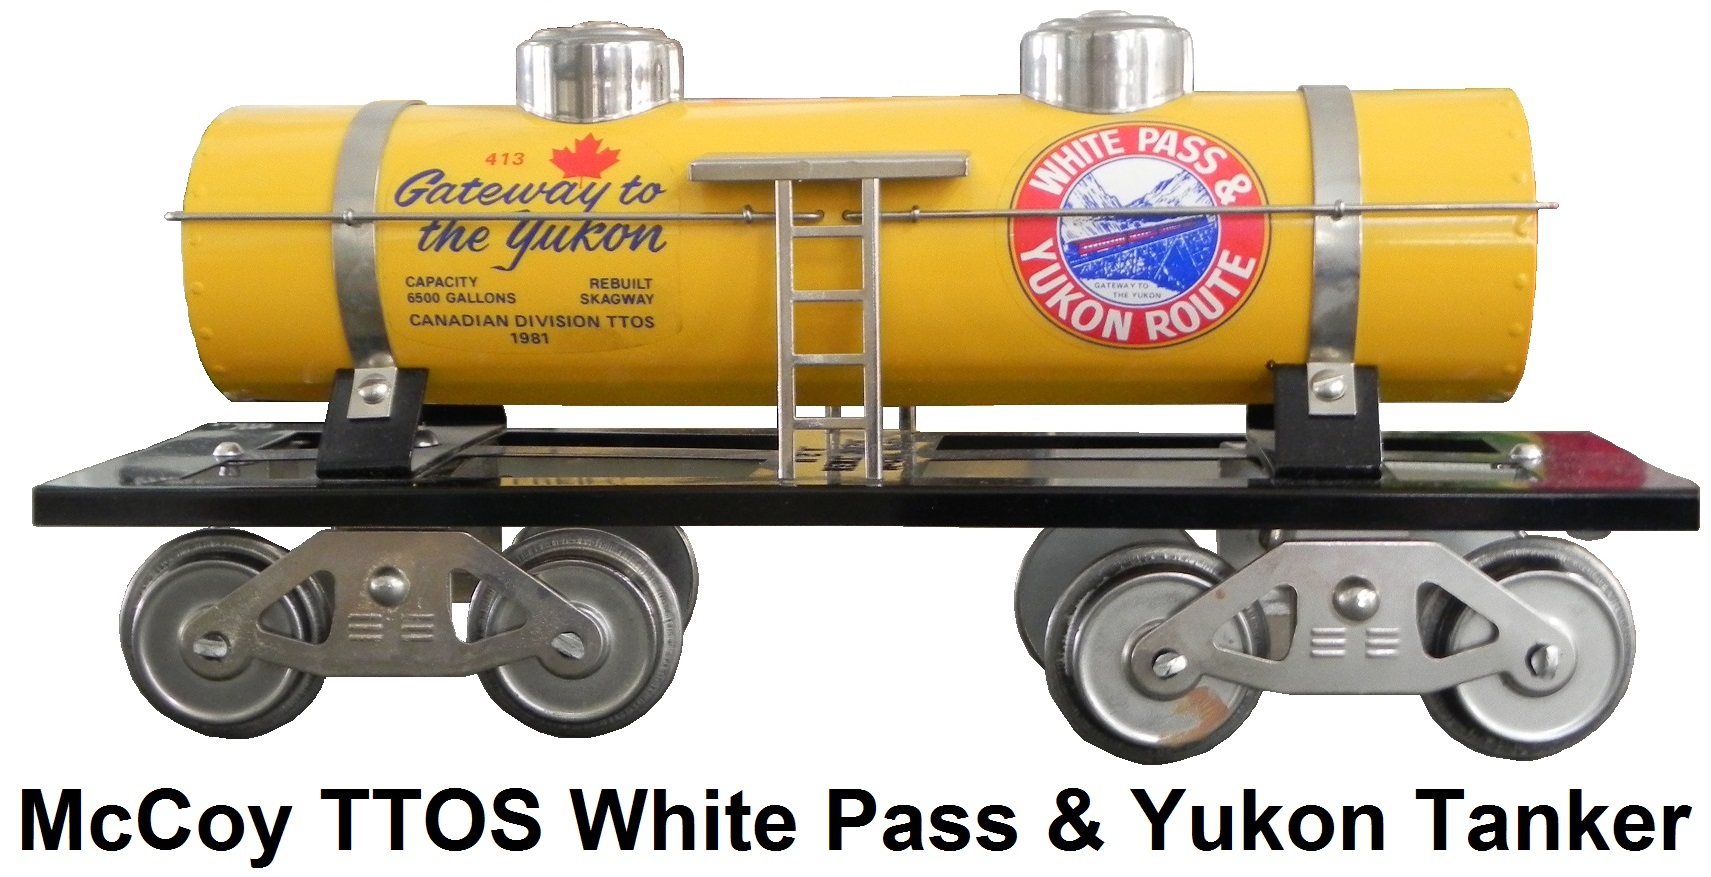 McCoy TTOS Canadian Division White Pass & Yukon Route double dome tanker in yellow, 107 produced